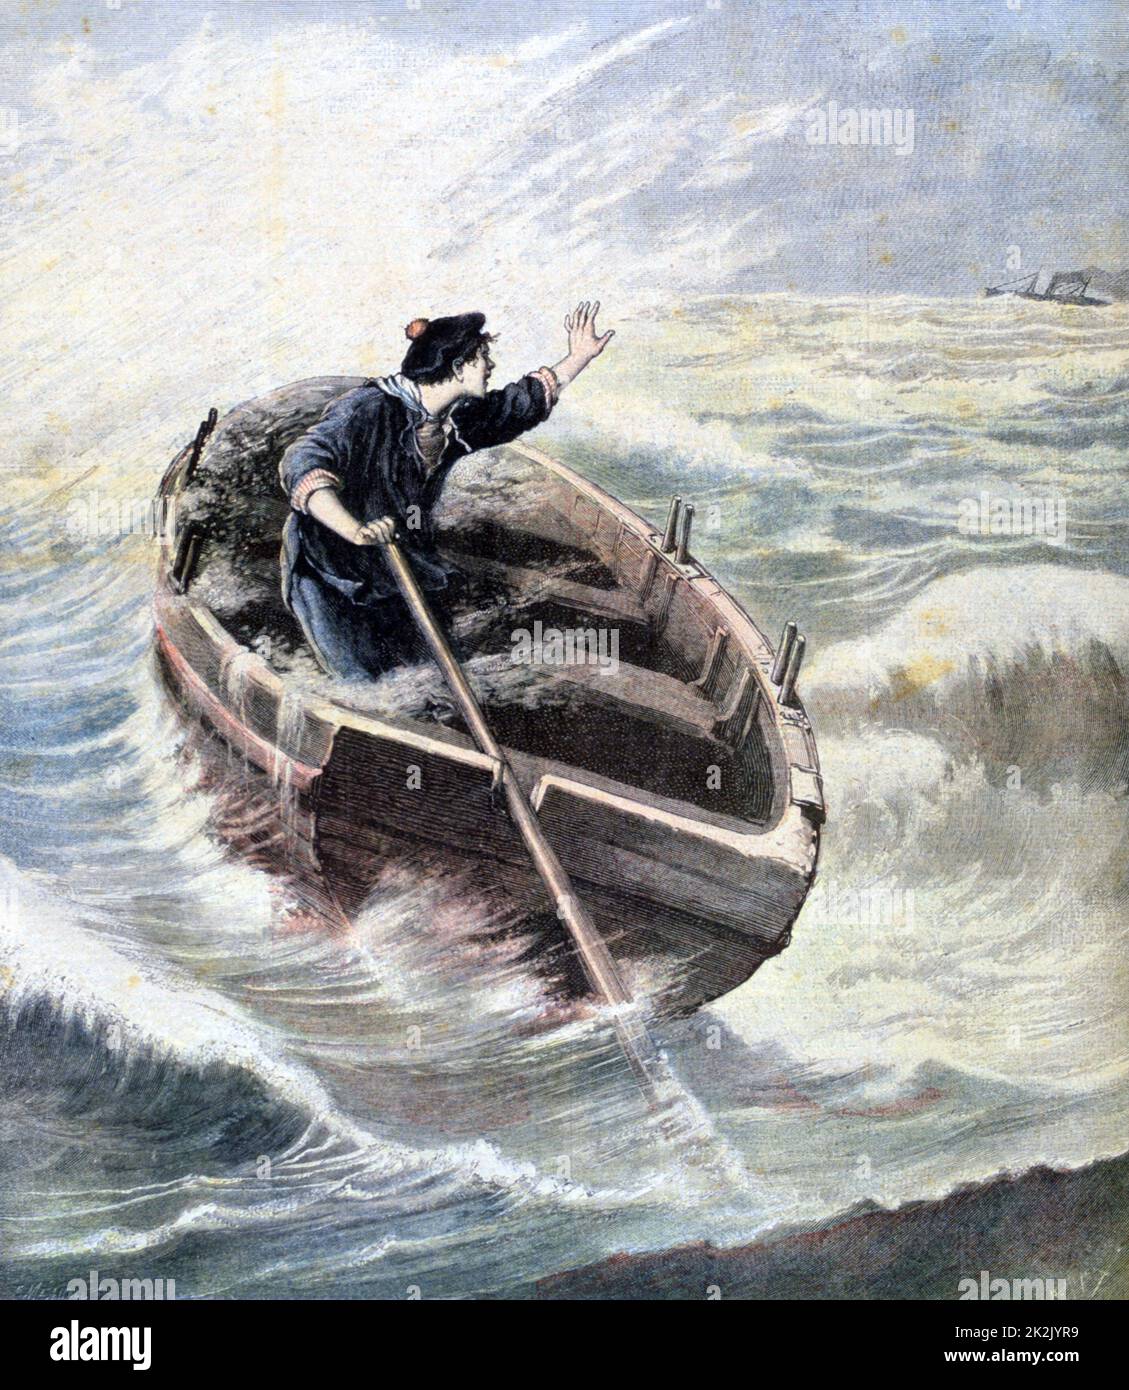 Lost at Sea: 14-year old Manuel Thomas, his father drowned, adrift in small rowing boat.  Saved about 20 miles off Alicante, Spain, by merchanti ship 'Euryanthe'. From 'Le Petit Journal', Paris, 3 January 1891. Stock Photo